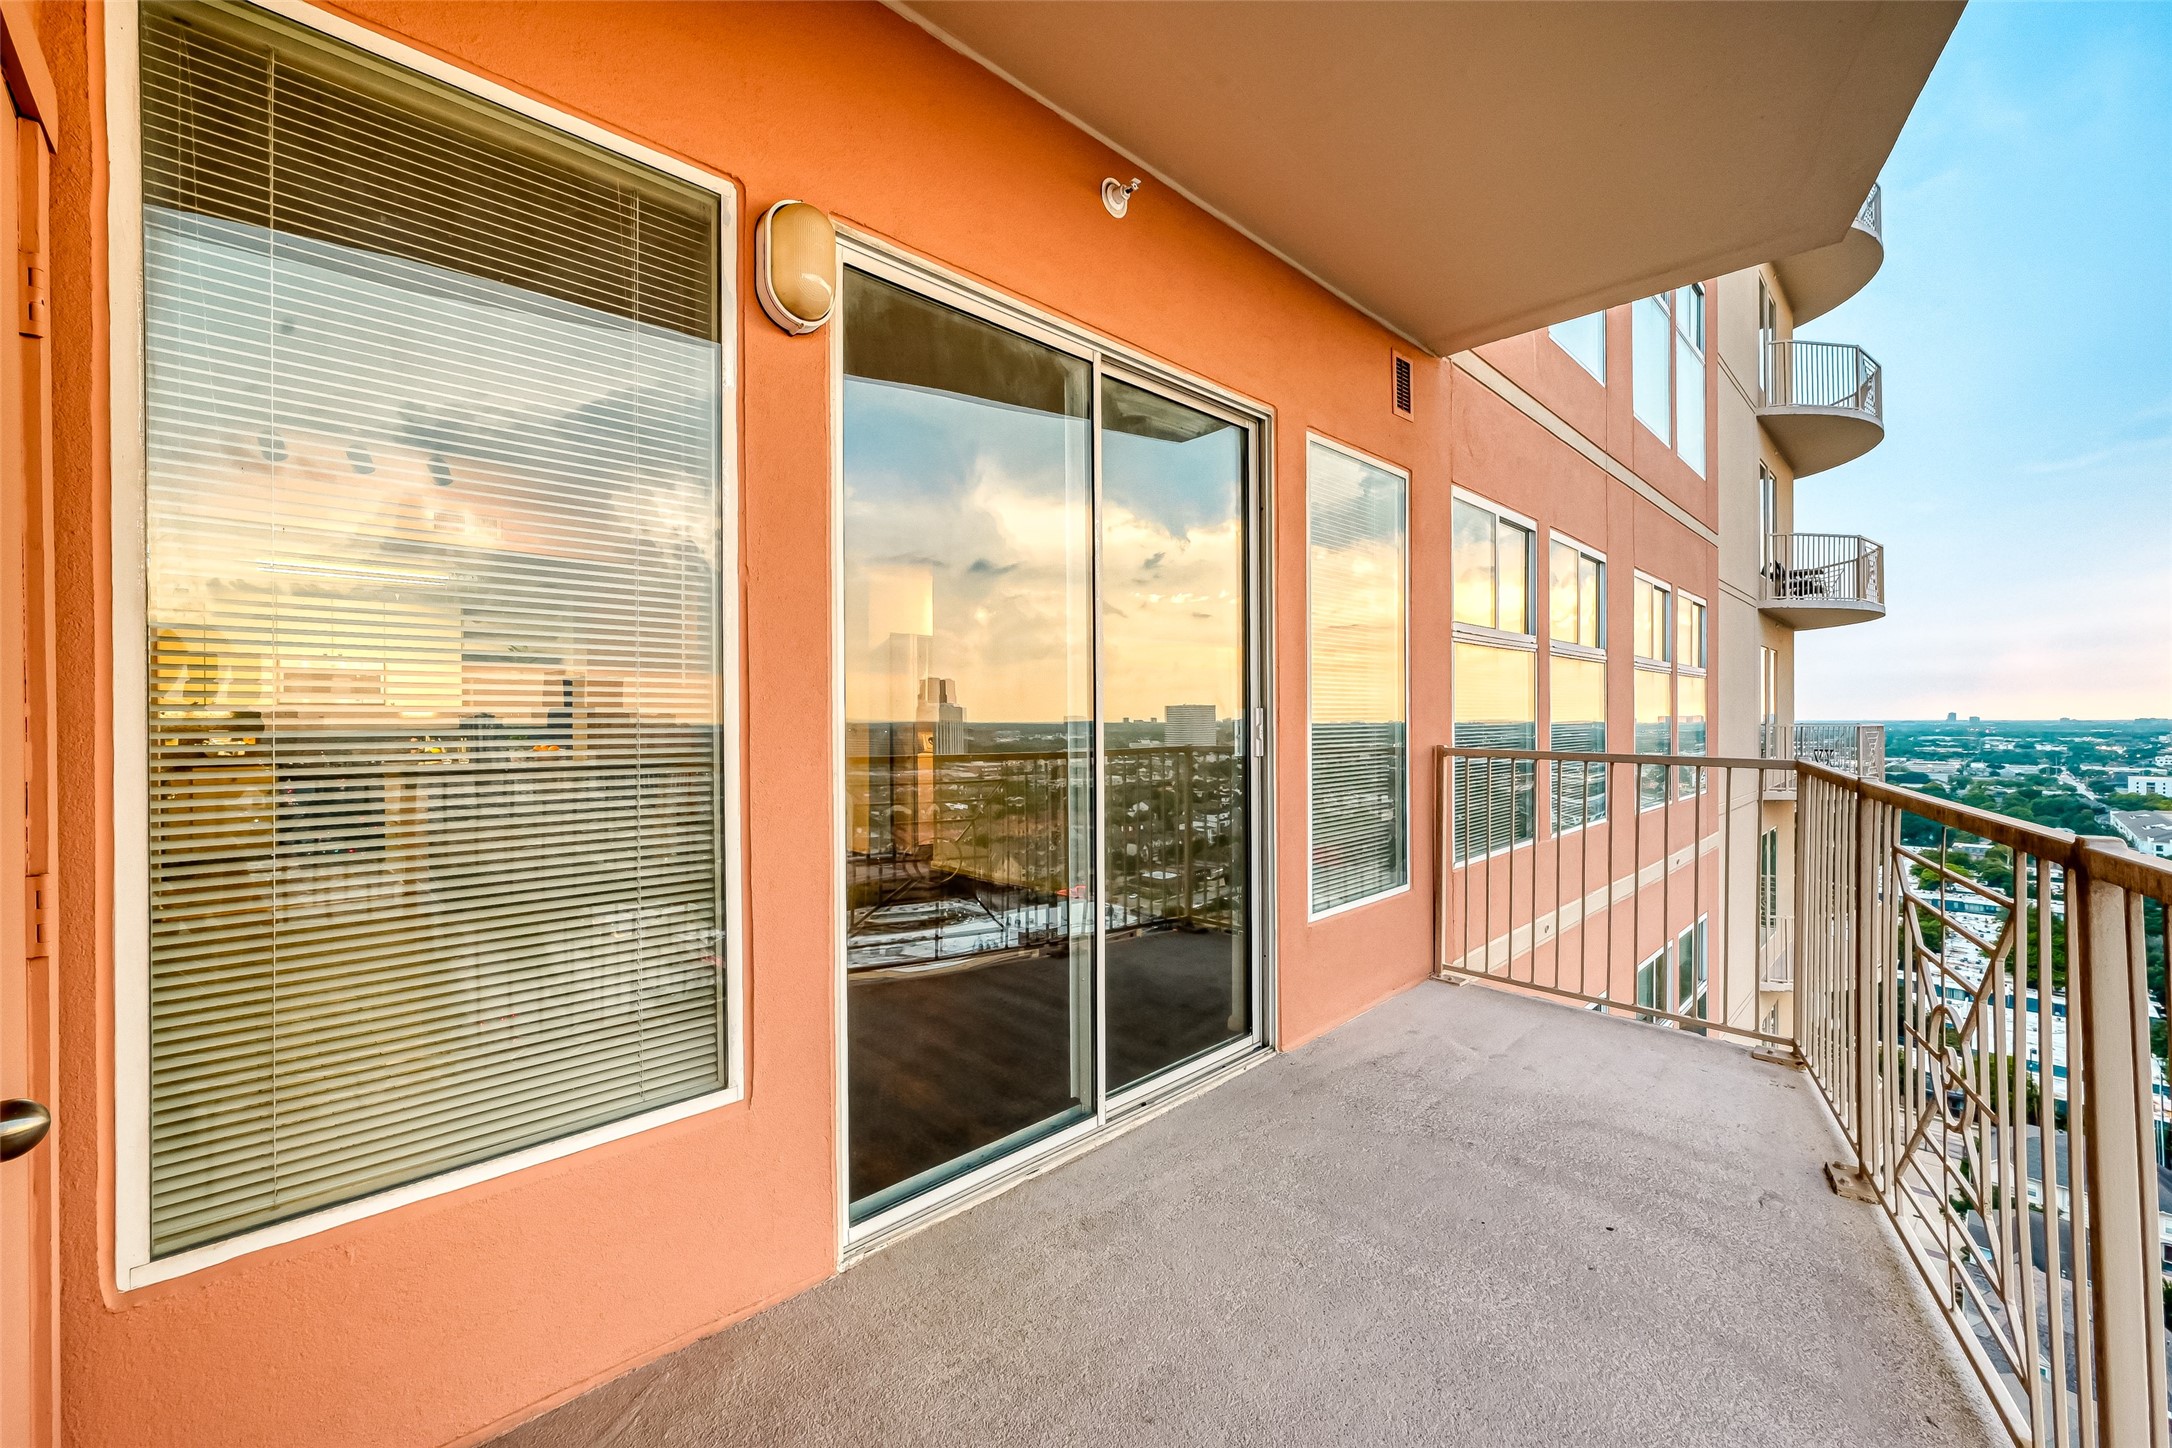 The large balcony can accommodate a whole patio set so you can enjoy the scenery with your favorite beverage.